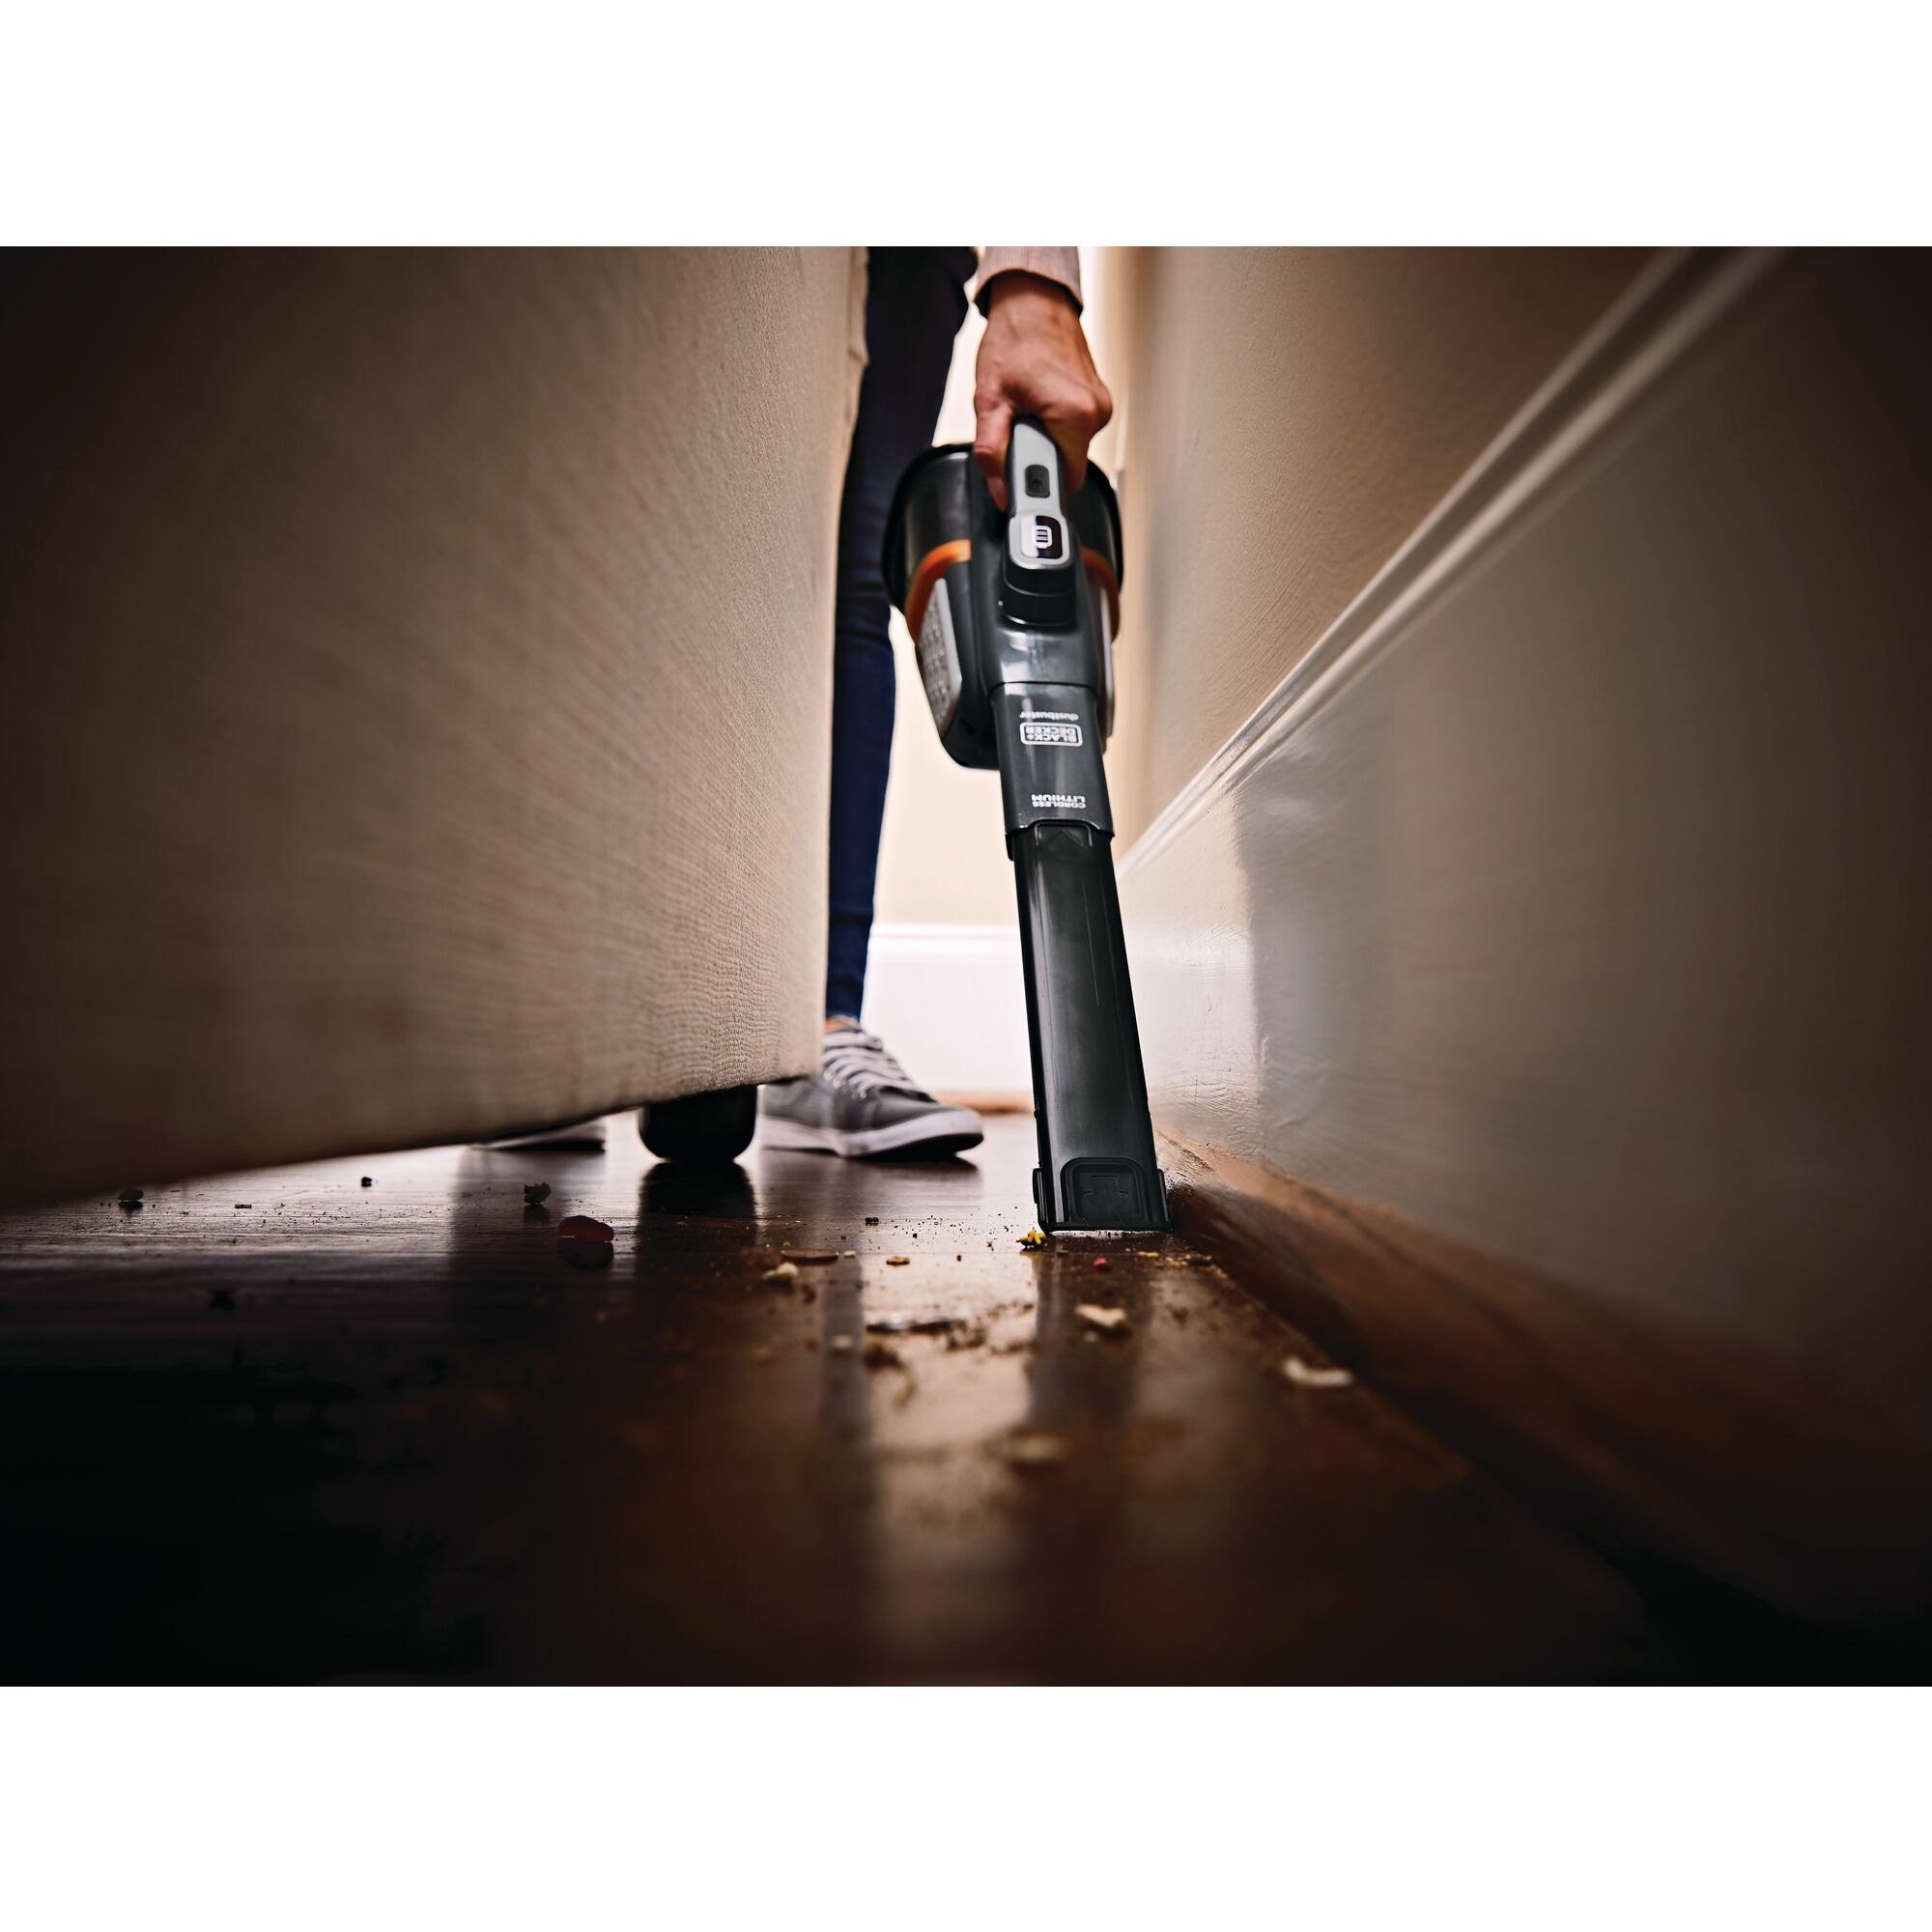 16 Volt dust buster Advanced Clean plus Hand Vacuum being used in a tight space.